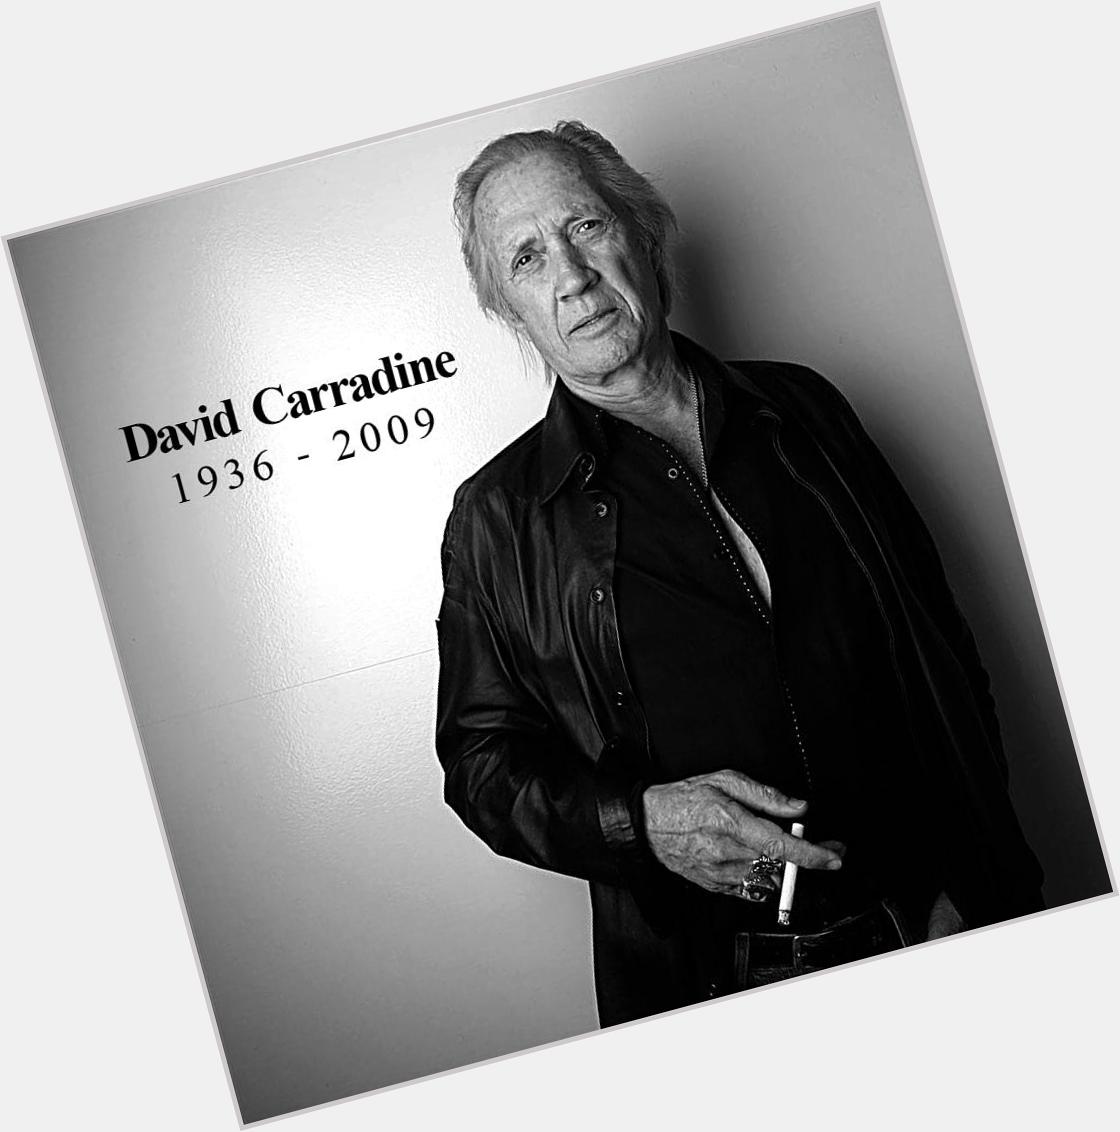 Happy Birthday to David Carradine, who would have turned 78 today! 